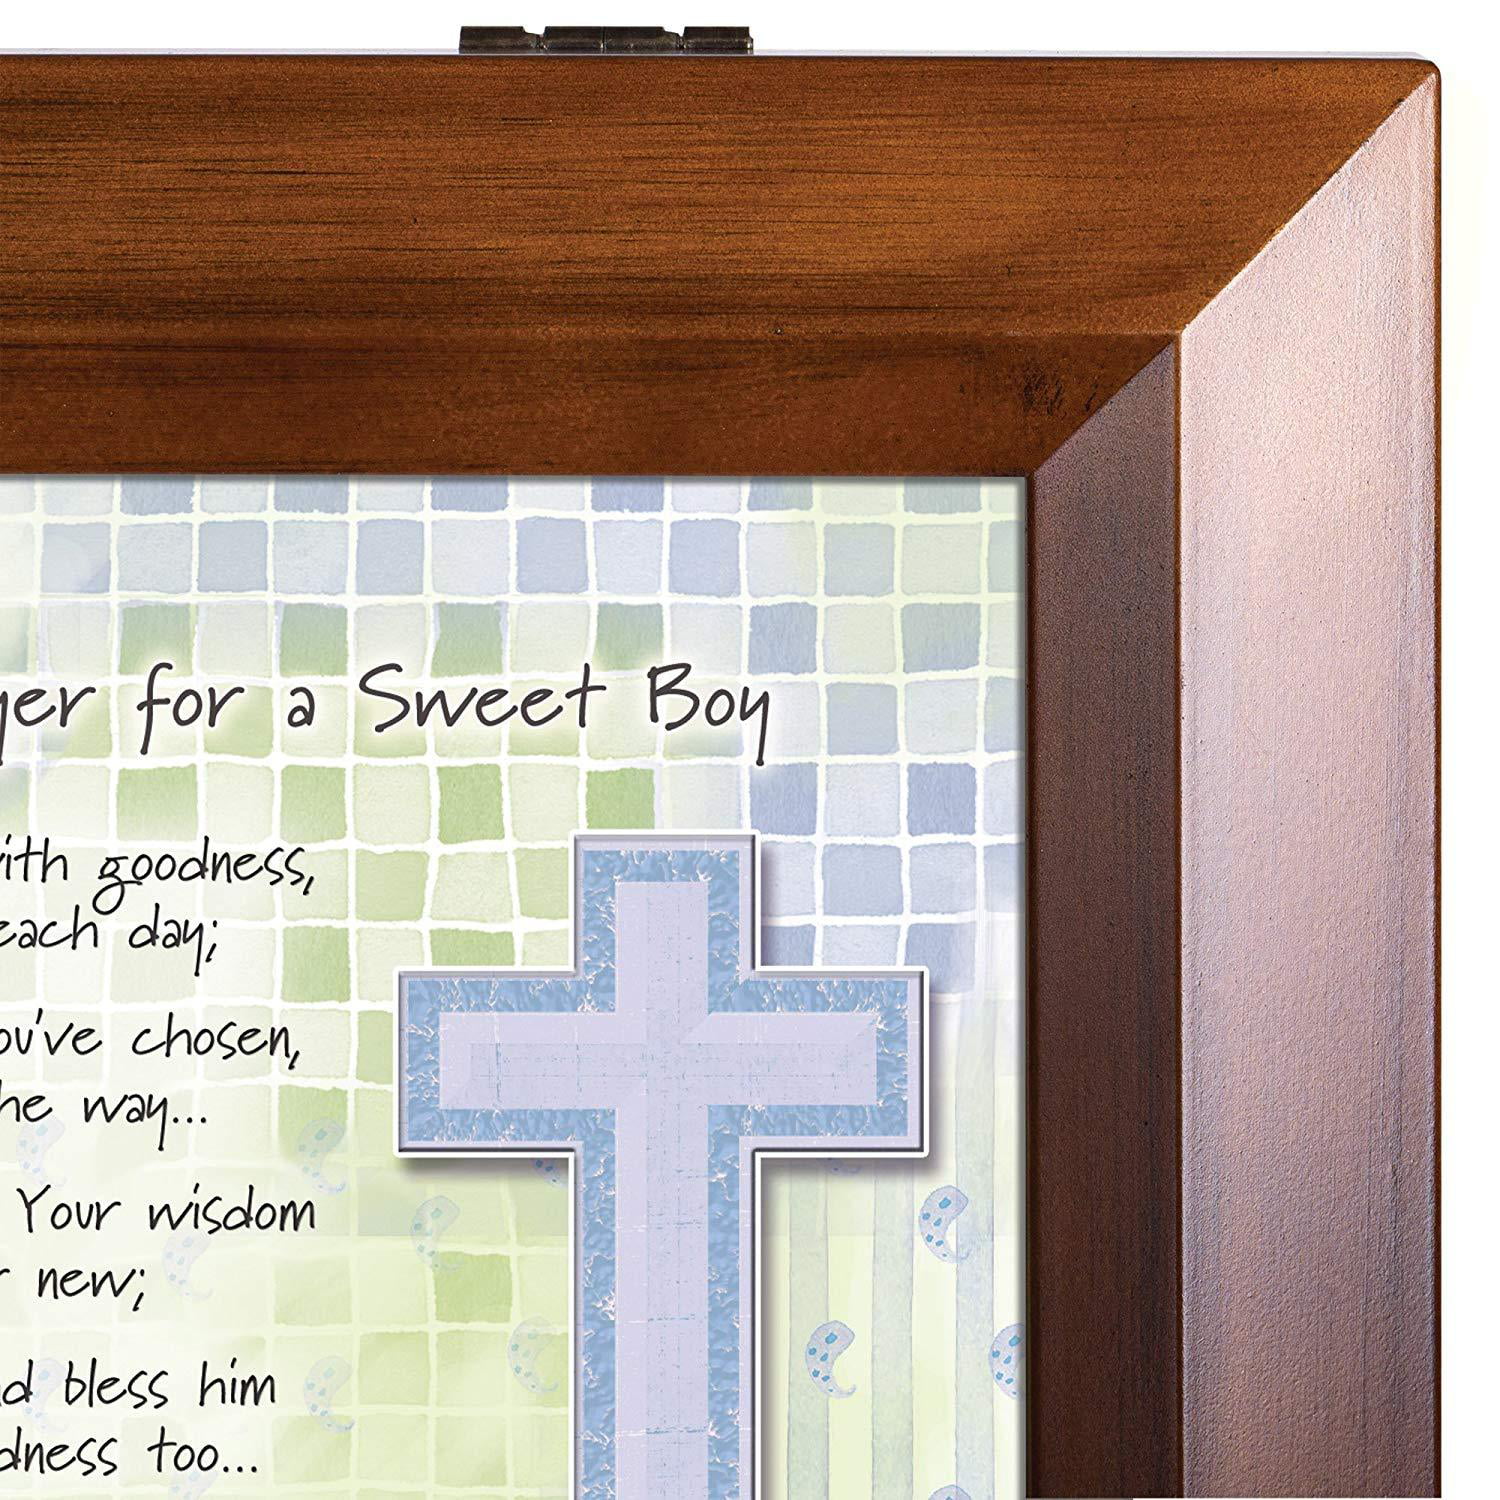 Baptismal Prayer for a Sweet Boy Wood Finish Jewelry Music Box - Plays Tune  You Are My Sunshine